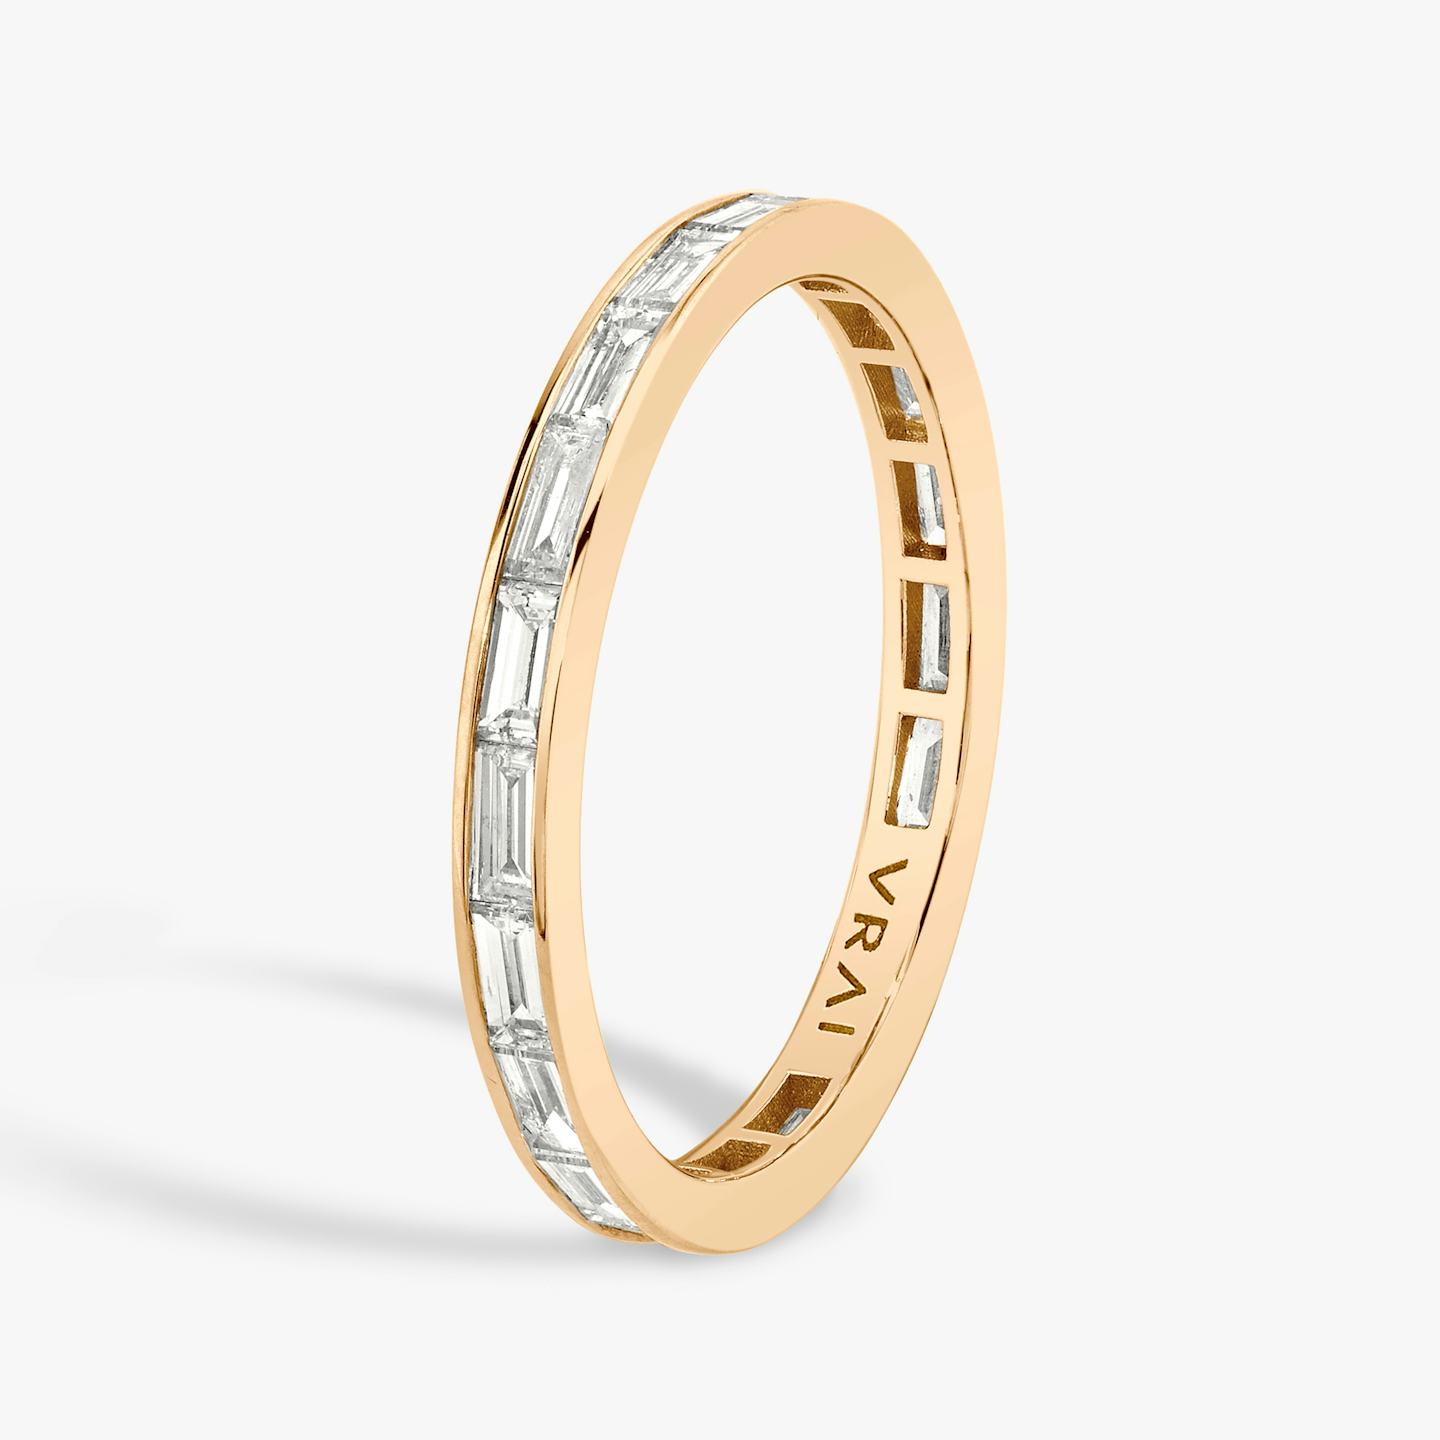 The Devotion Band | Baguette | 14k | 14k Rose Gold | Band style: Full diamond | Band width: Large